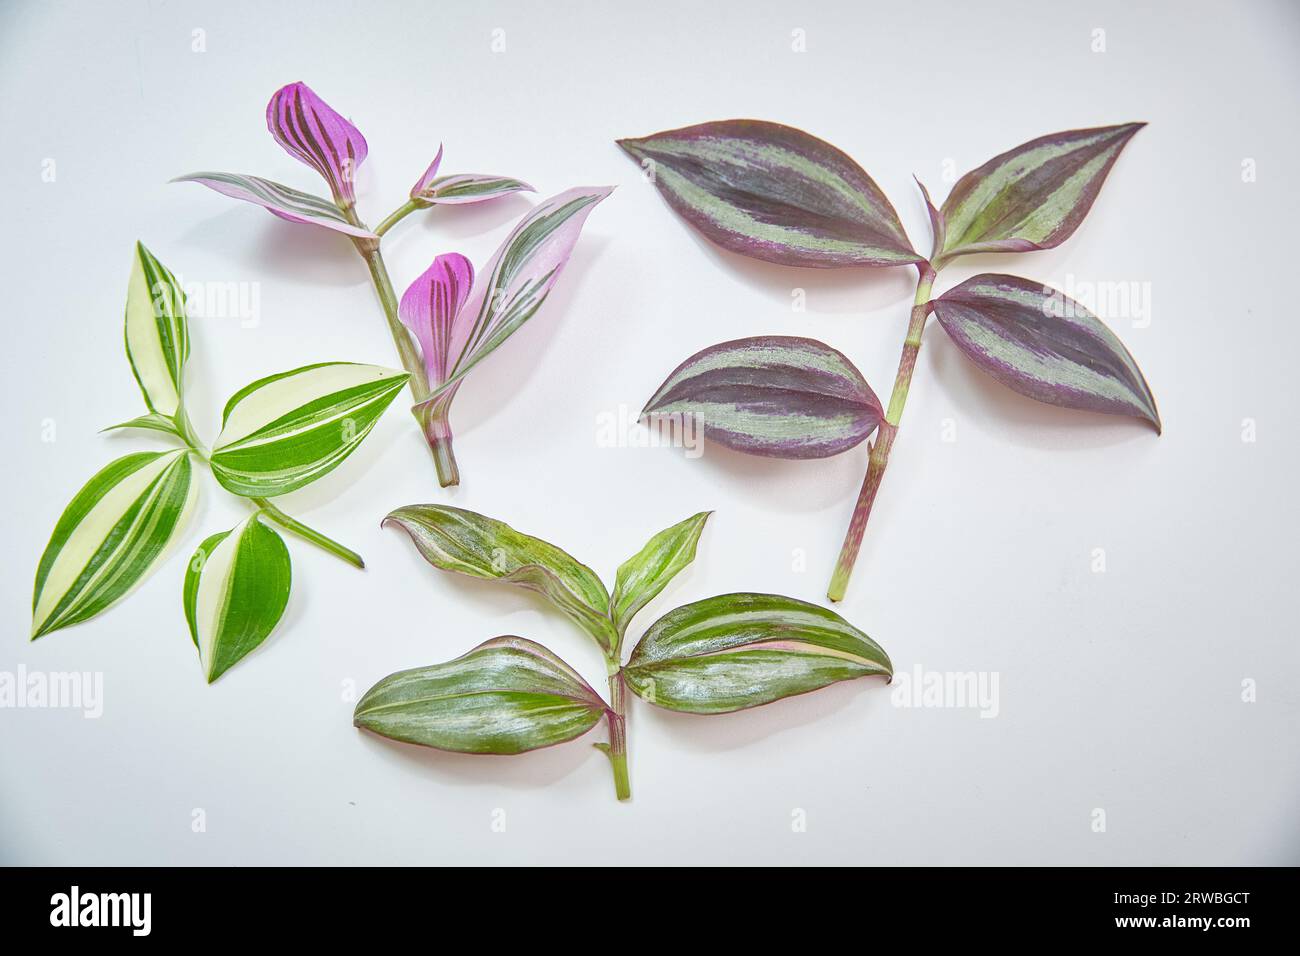 A set of slices of houseplants of tradescantia of different varieties Stock Photo